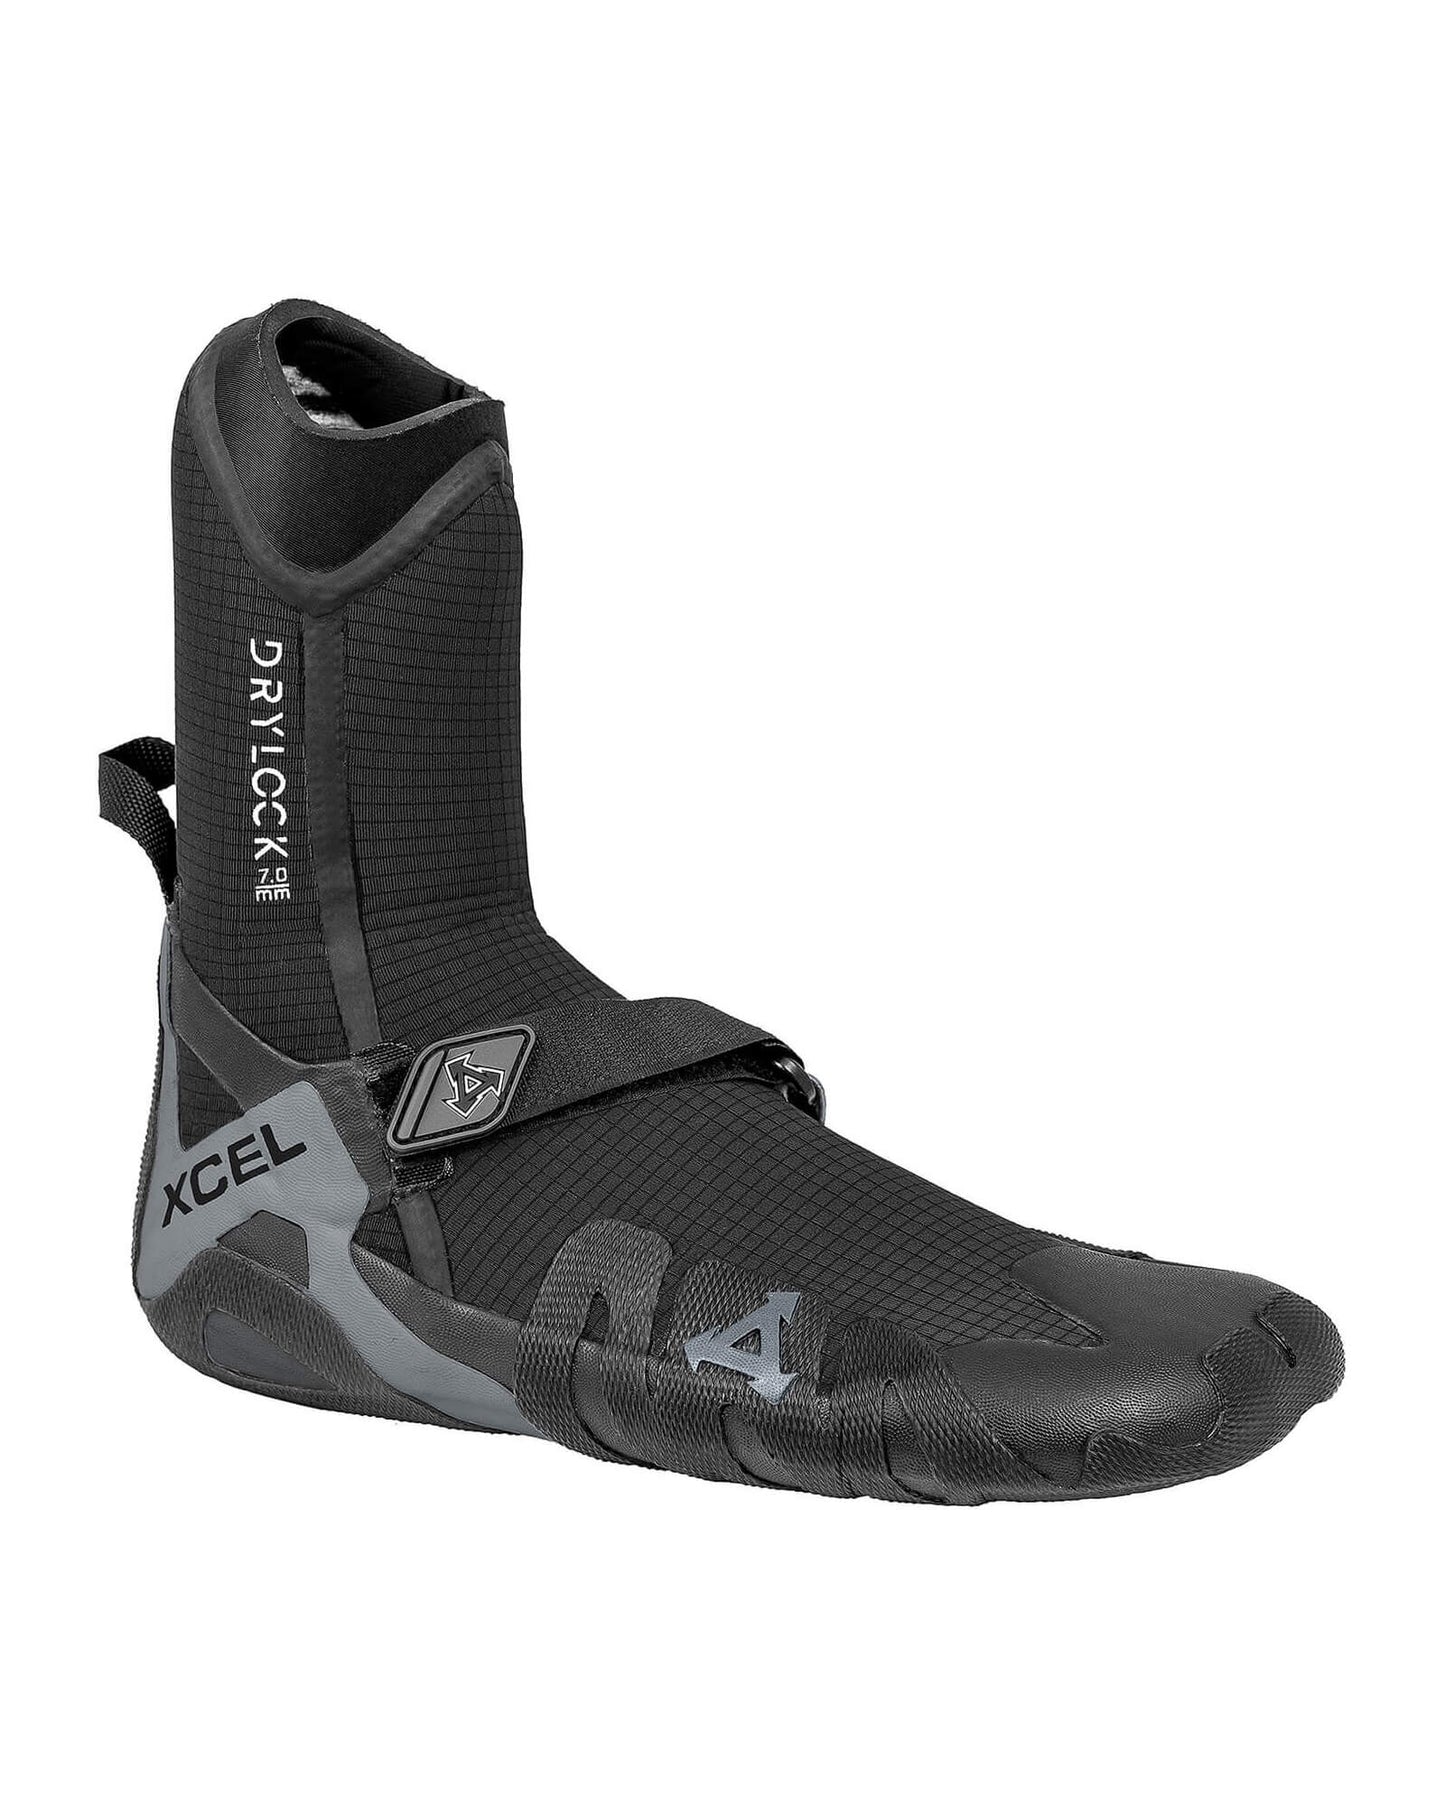 7mm XCEL DRYLOCK Round Toe Wetsuit Boots